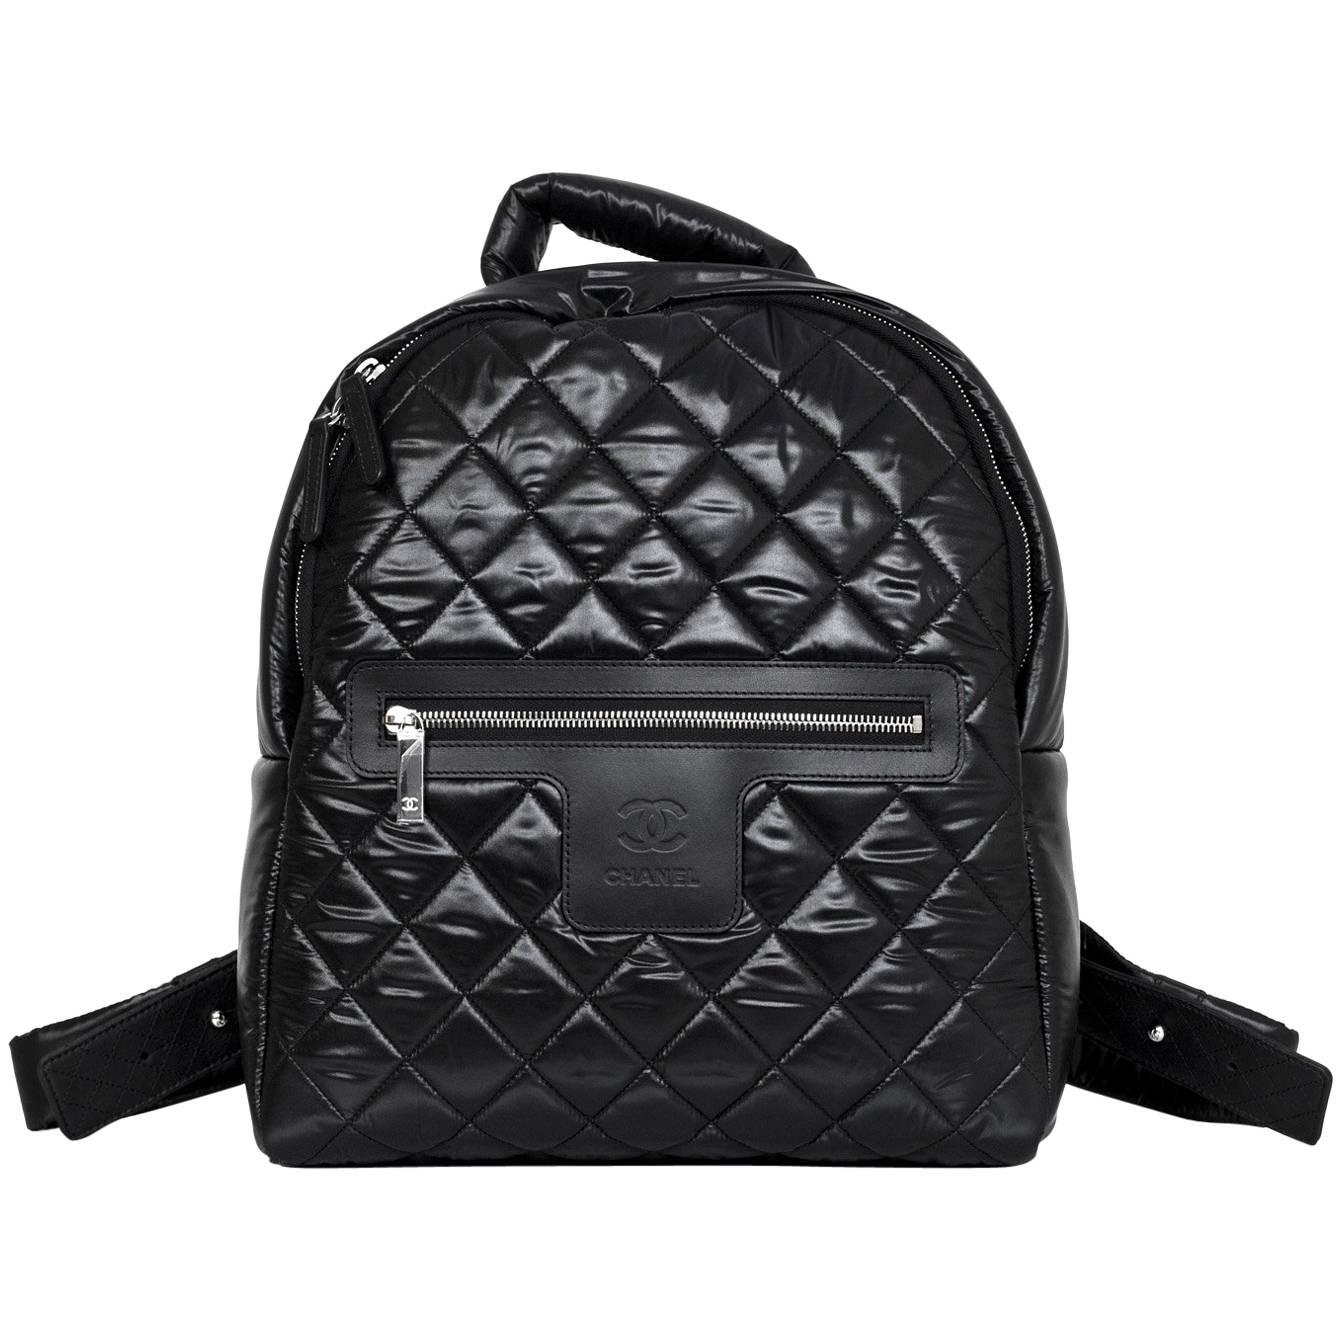 Chanel NEW 2017 Black Quilted Nylon Coco Cocoon Backpack Bag 